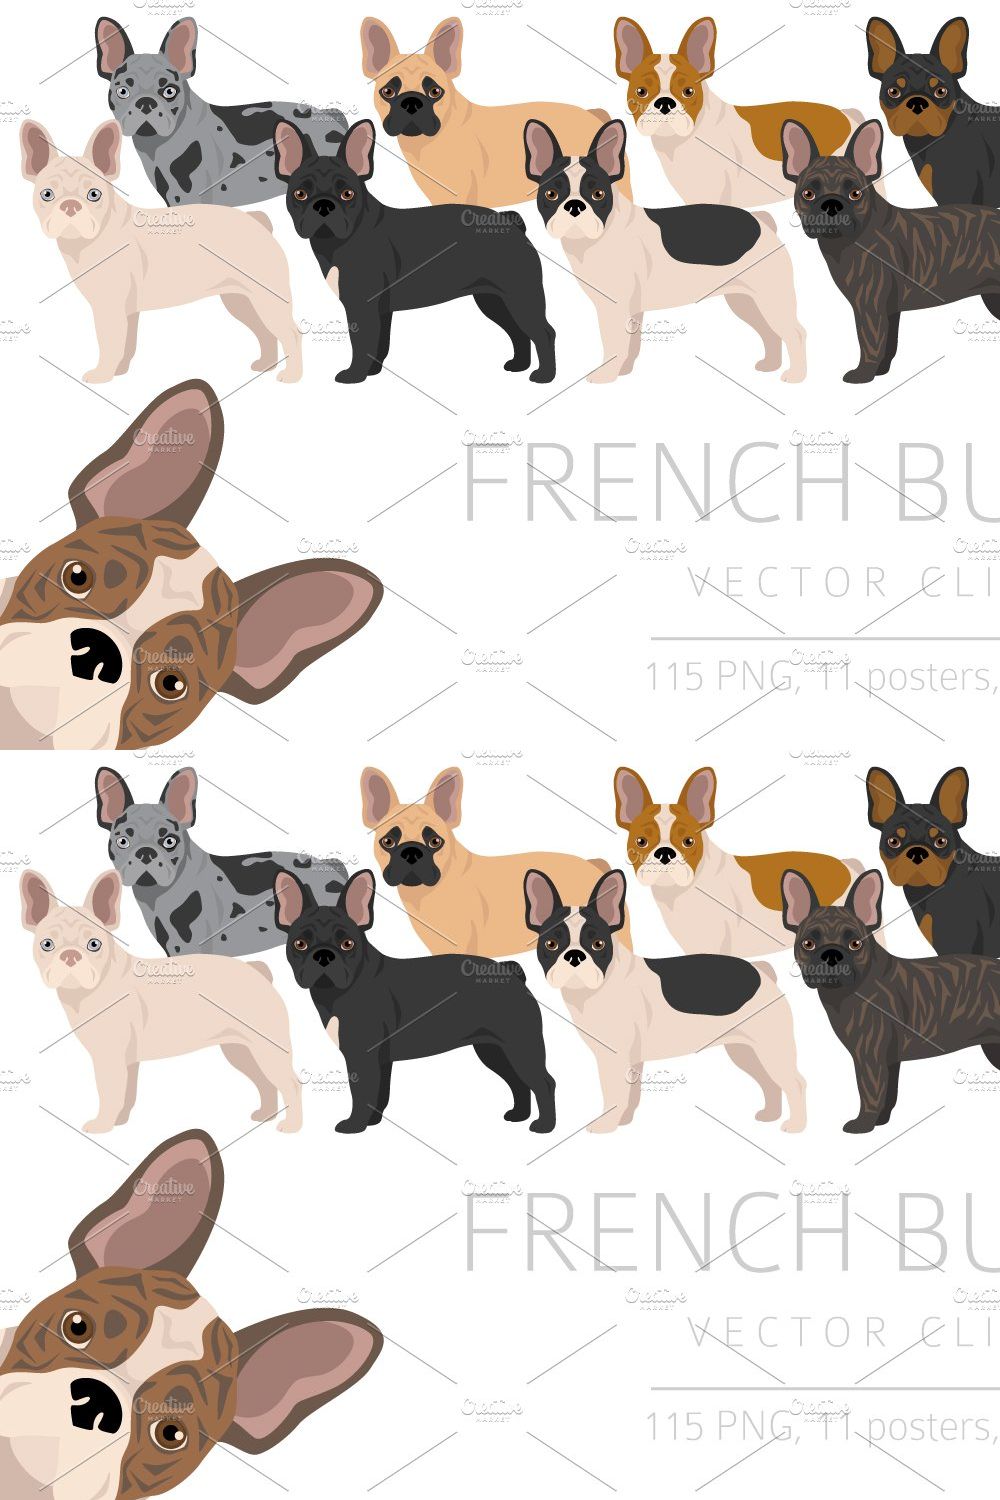 French Bulldog clipart pinterest preview image.